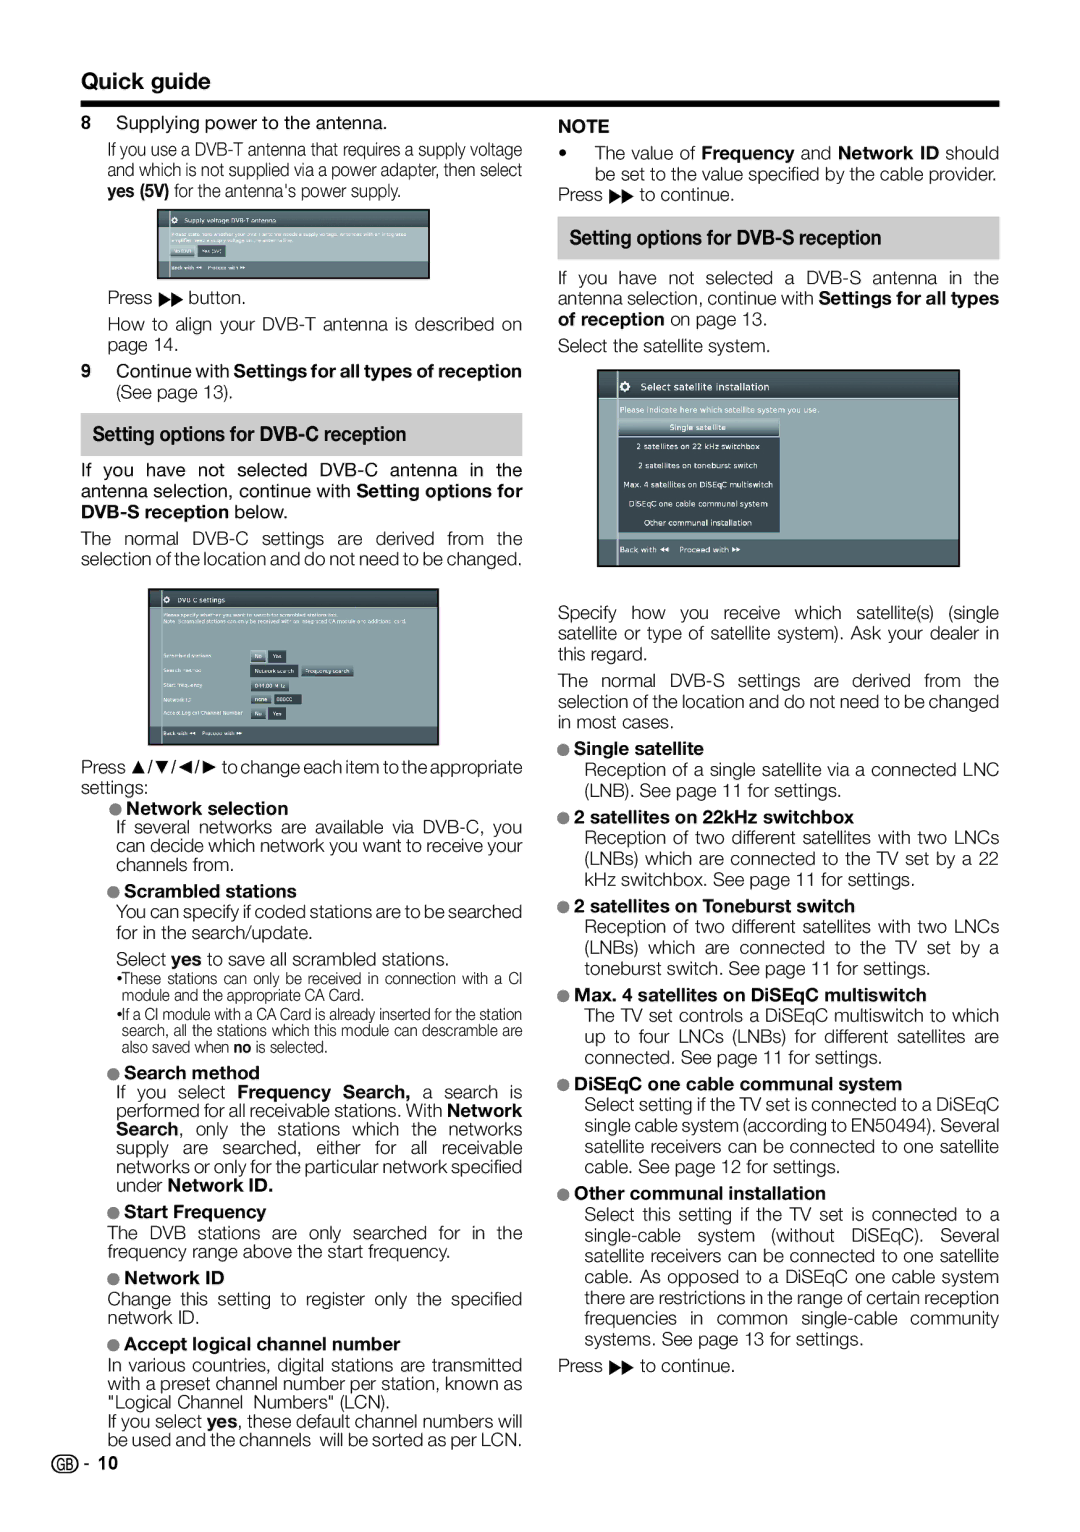 Sharp LCD COLOUR TELEVISION operation manual Setting options for DVB-C reception, Setting options for DVB-S reception 